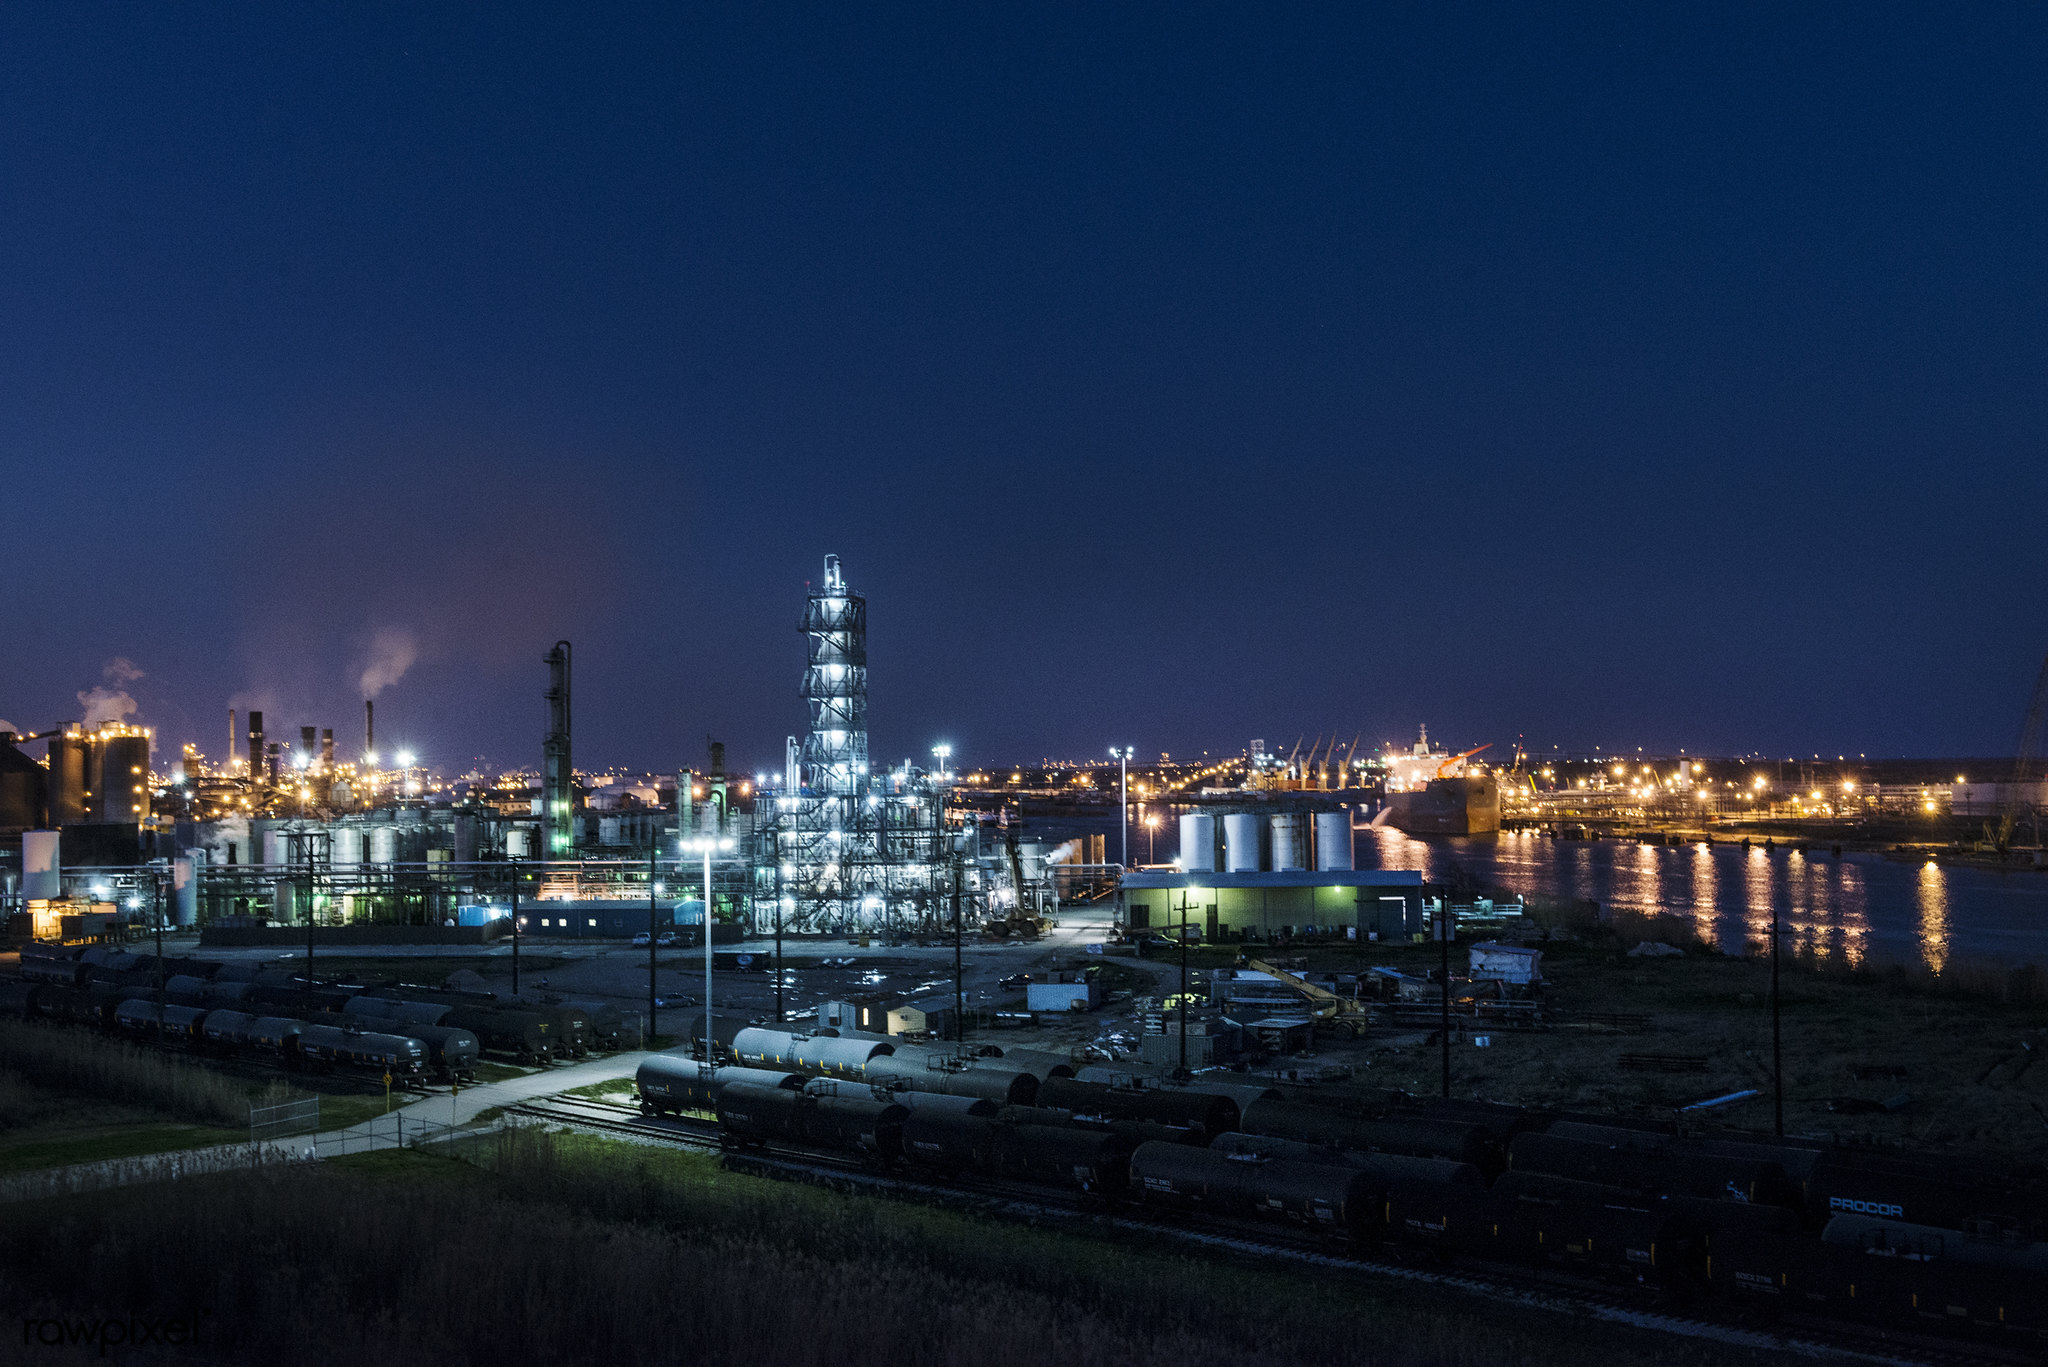 Dusk shot of an industrial scene along the road from Port Arthur to Sabine Pass, Texas.